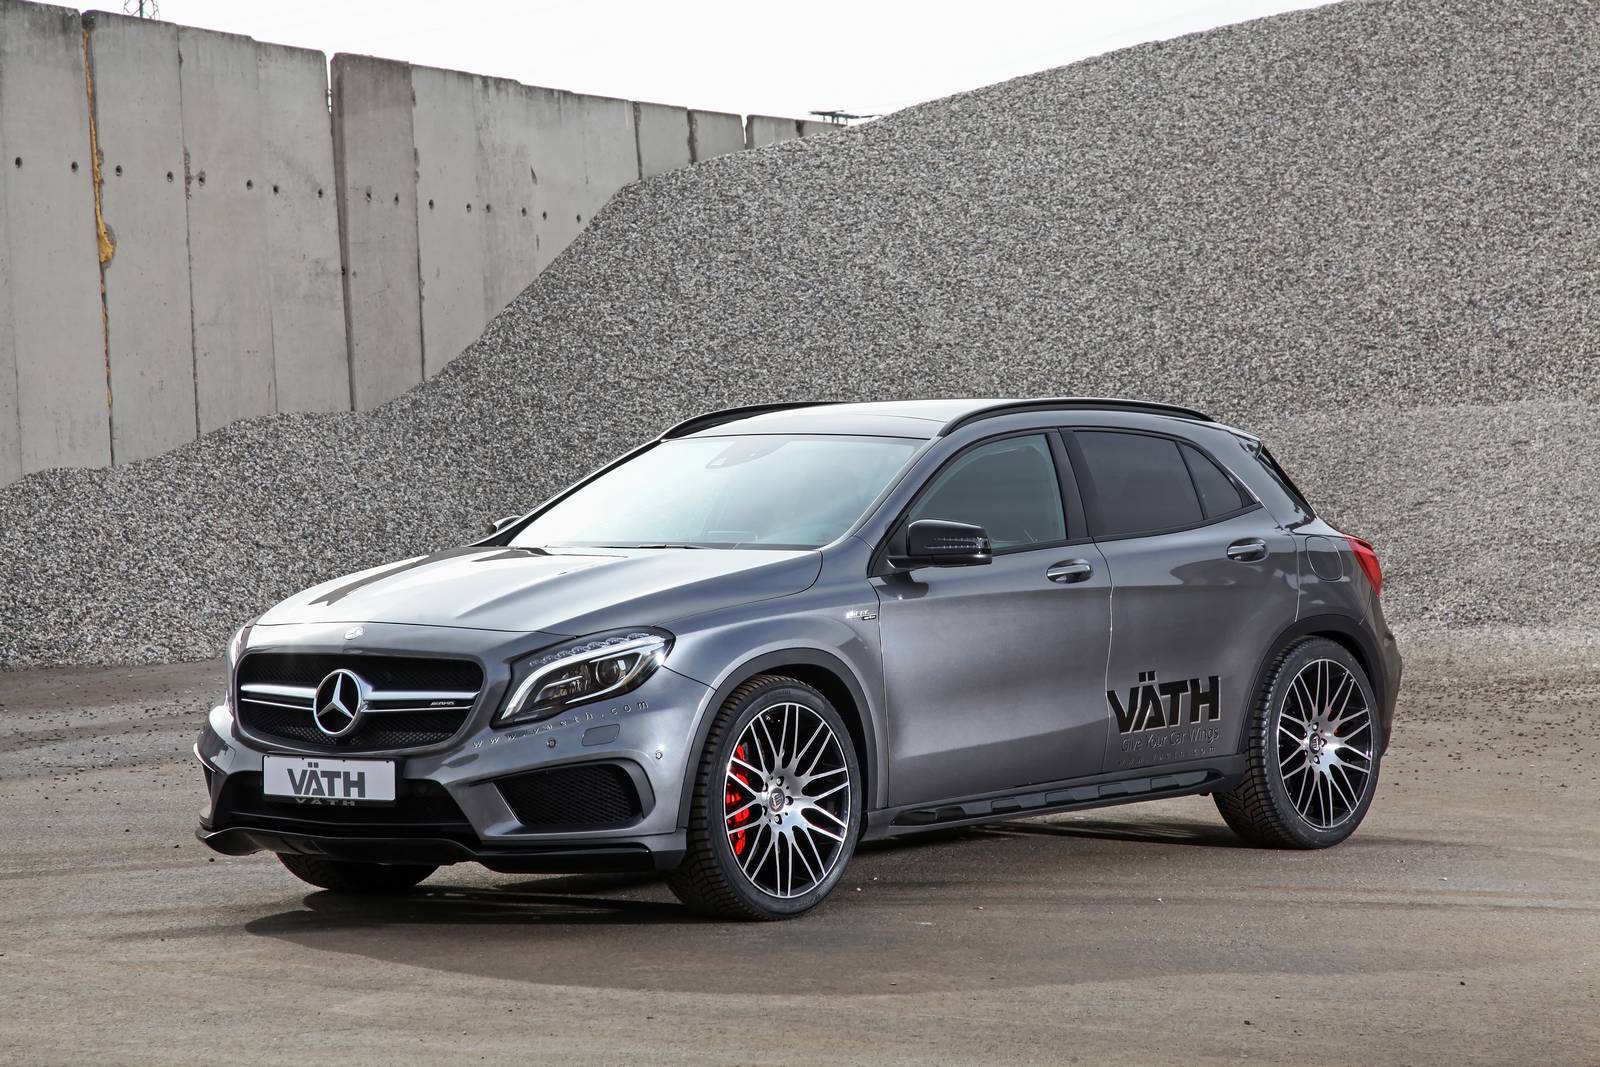 Mercedes-Benz GLA45 AMG Crossover Tuned By Vath 7